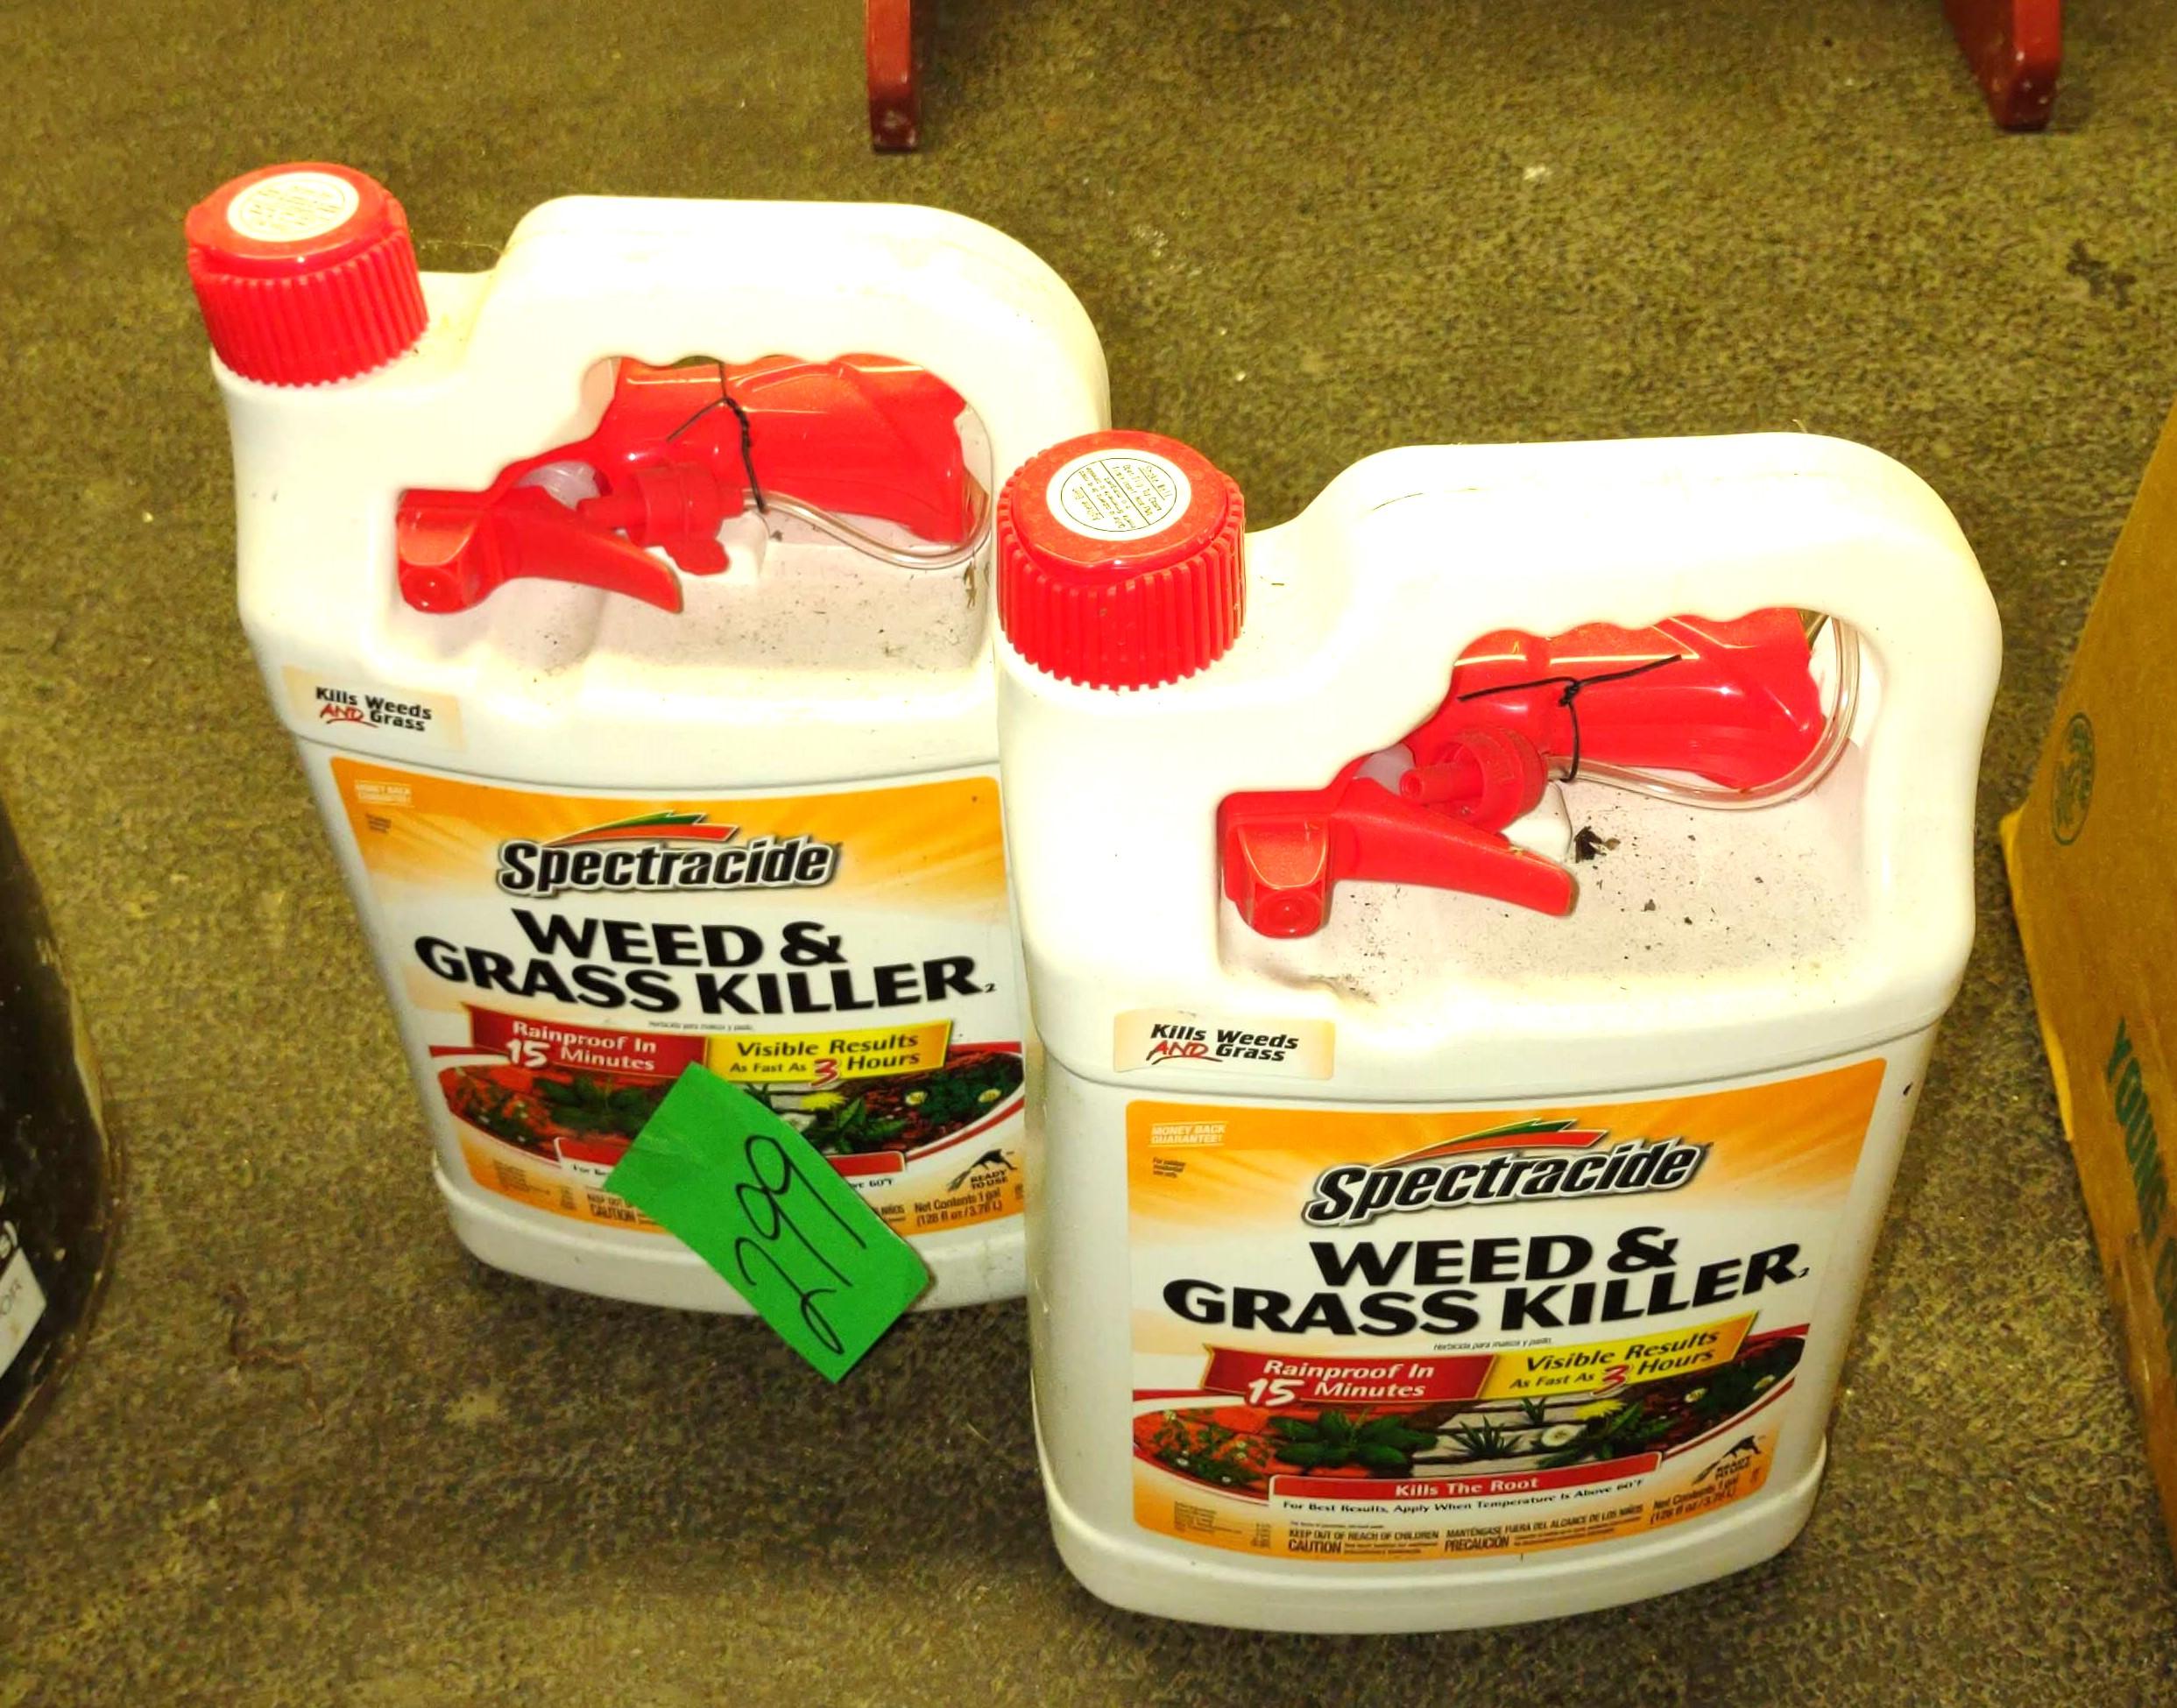 2 FULL WEED AND GRASS KILLER JUGS - PICK UP ONLY